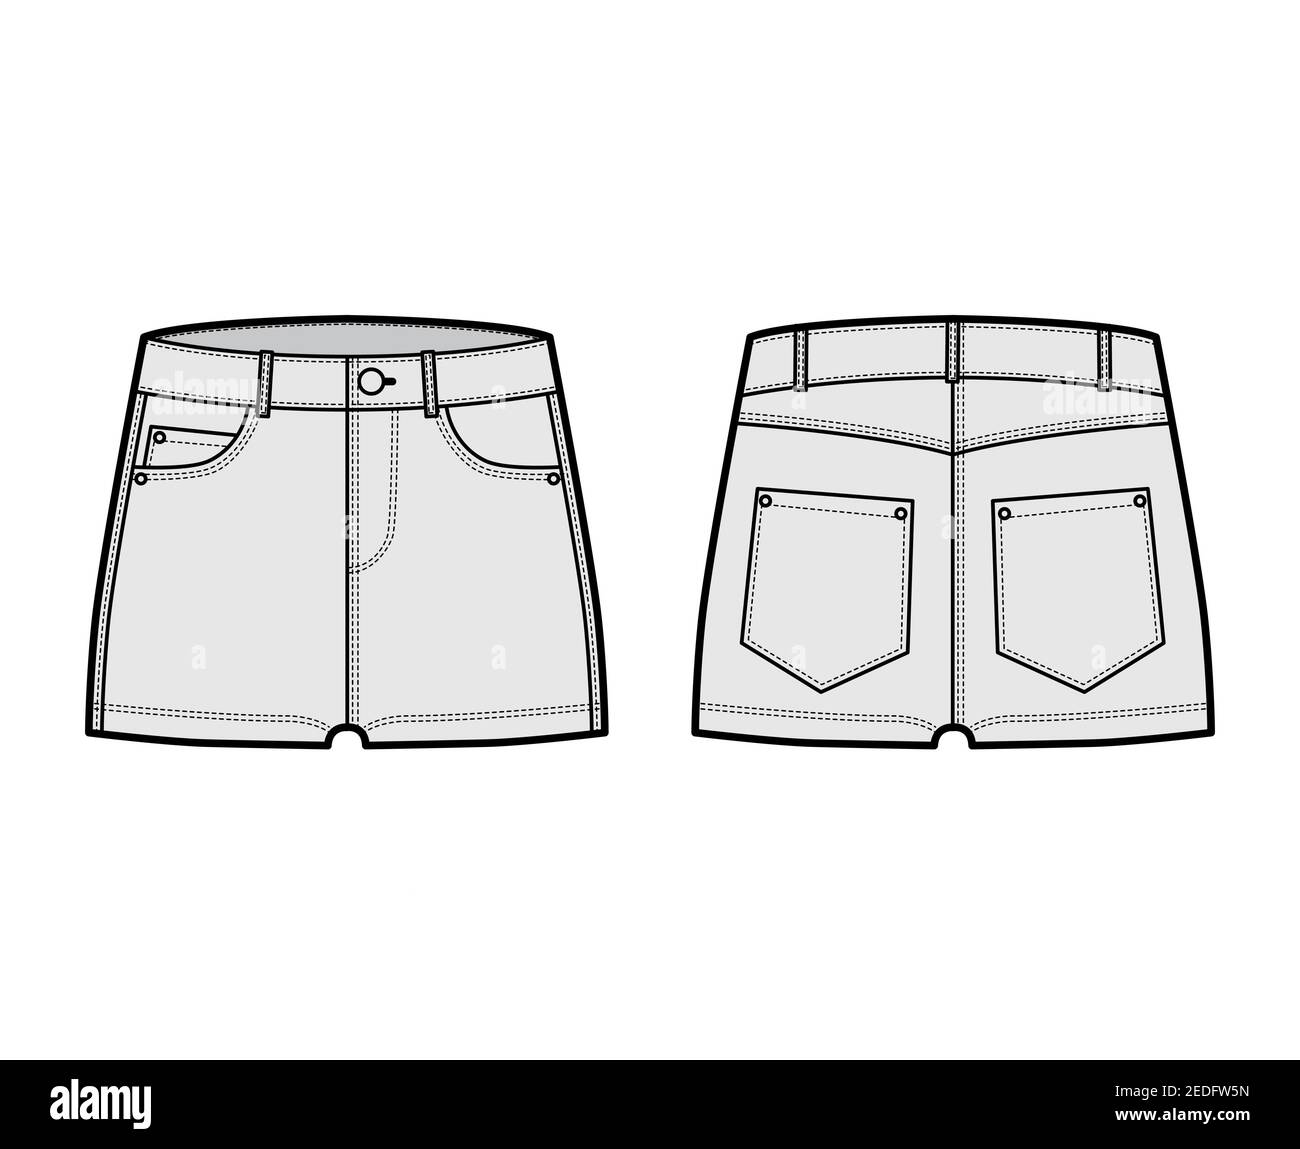 Denim hot short pants technical fashion illustration with micro length, low waist, low rise, 5 pockets. Flat bottom apparel template front, back, grey color style. Women, men, unisex CAD mockup Stock Vector